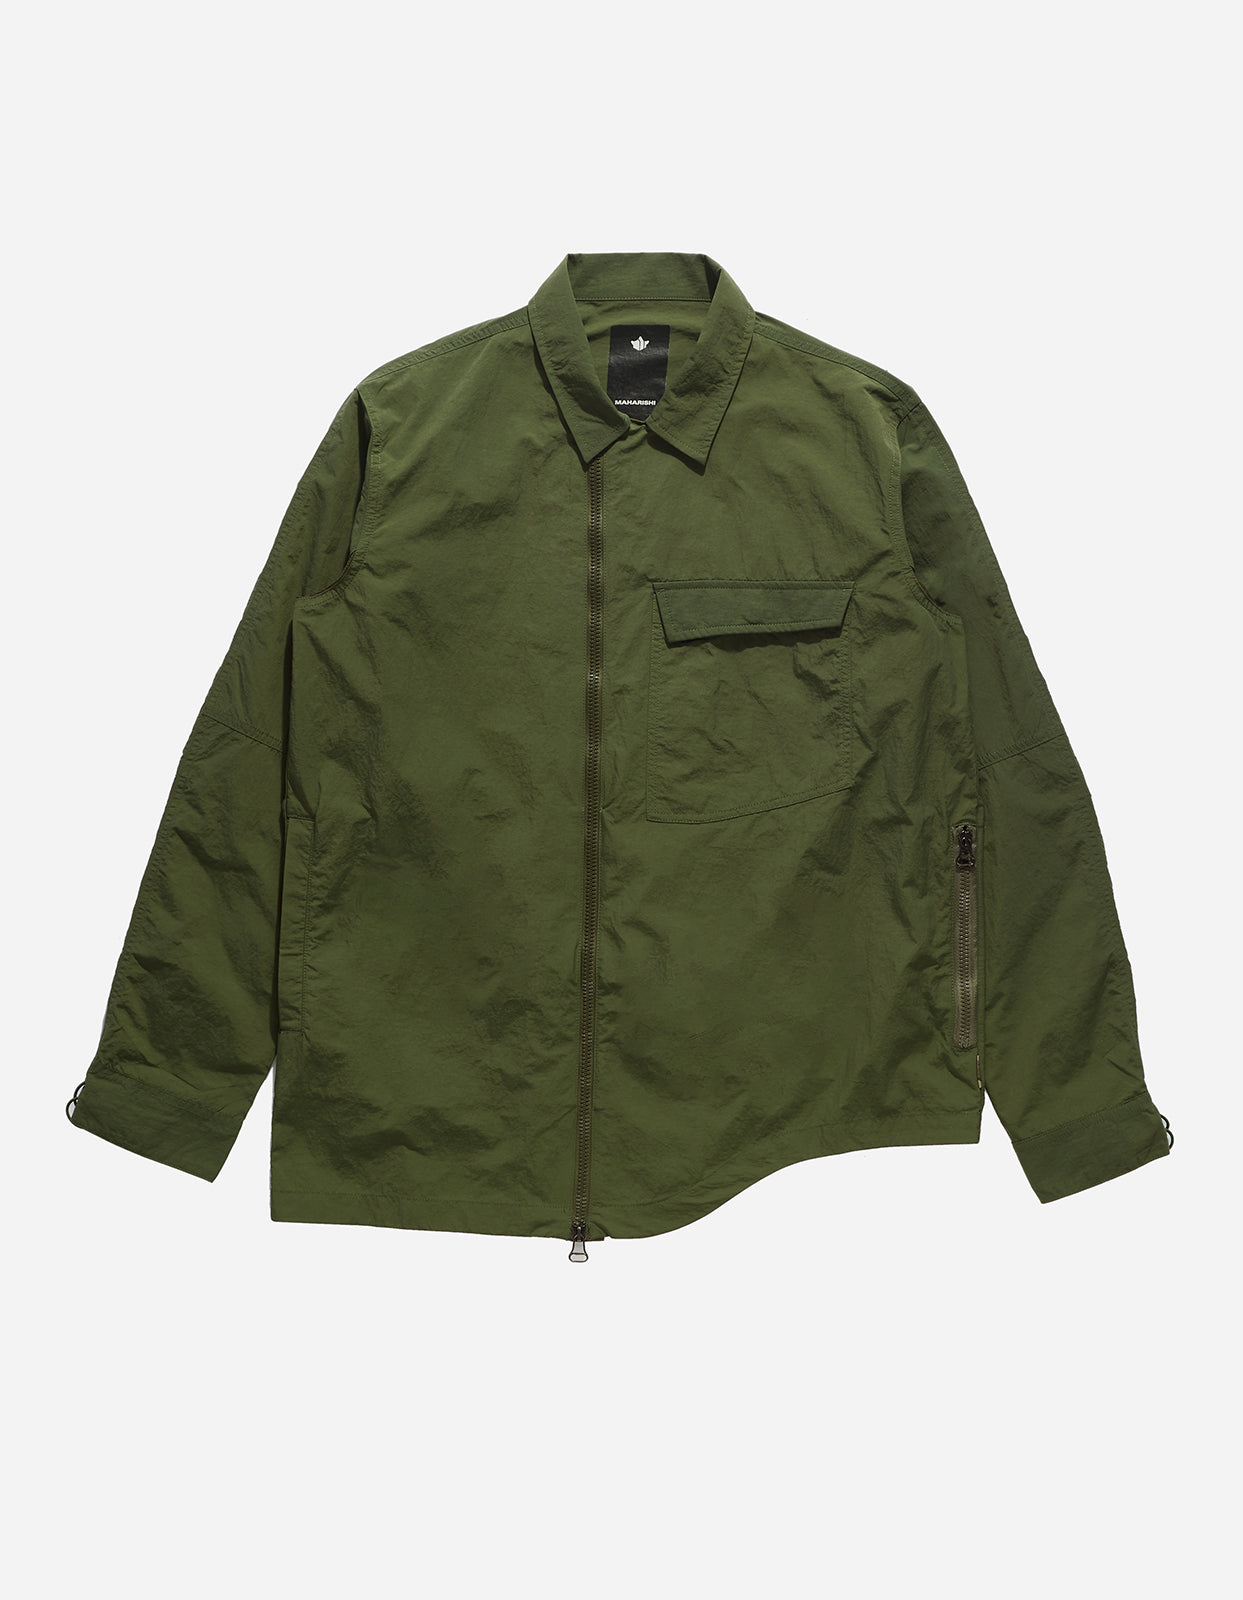 Maharishi | Sale | AW22 up to 40% Off - New Lines Added